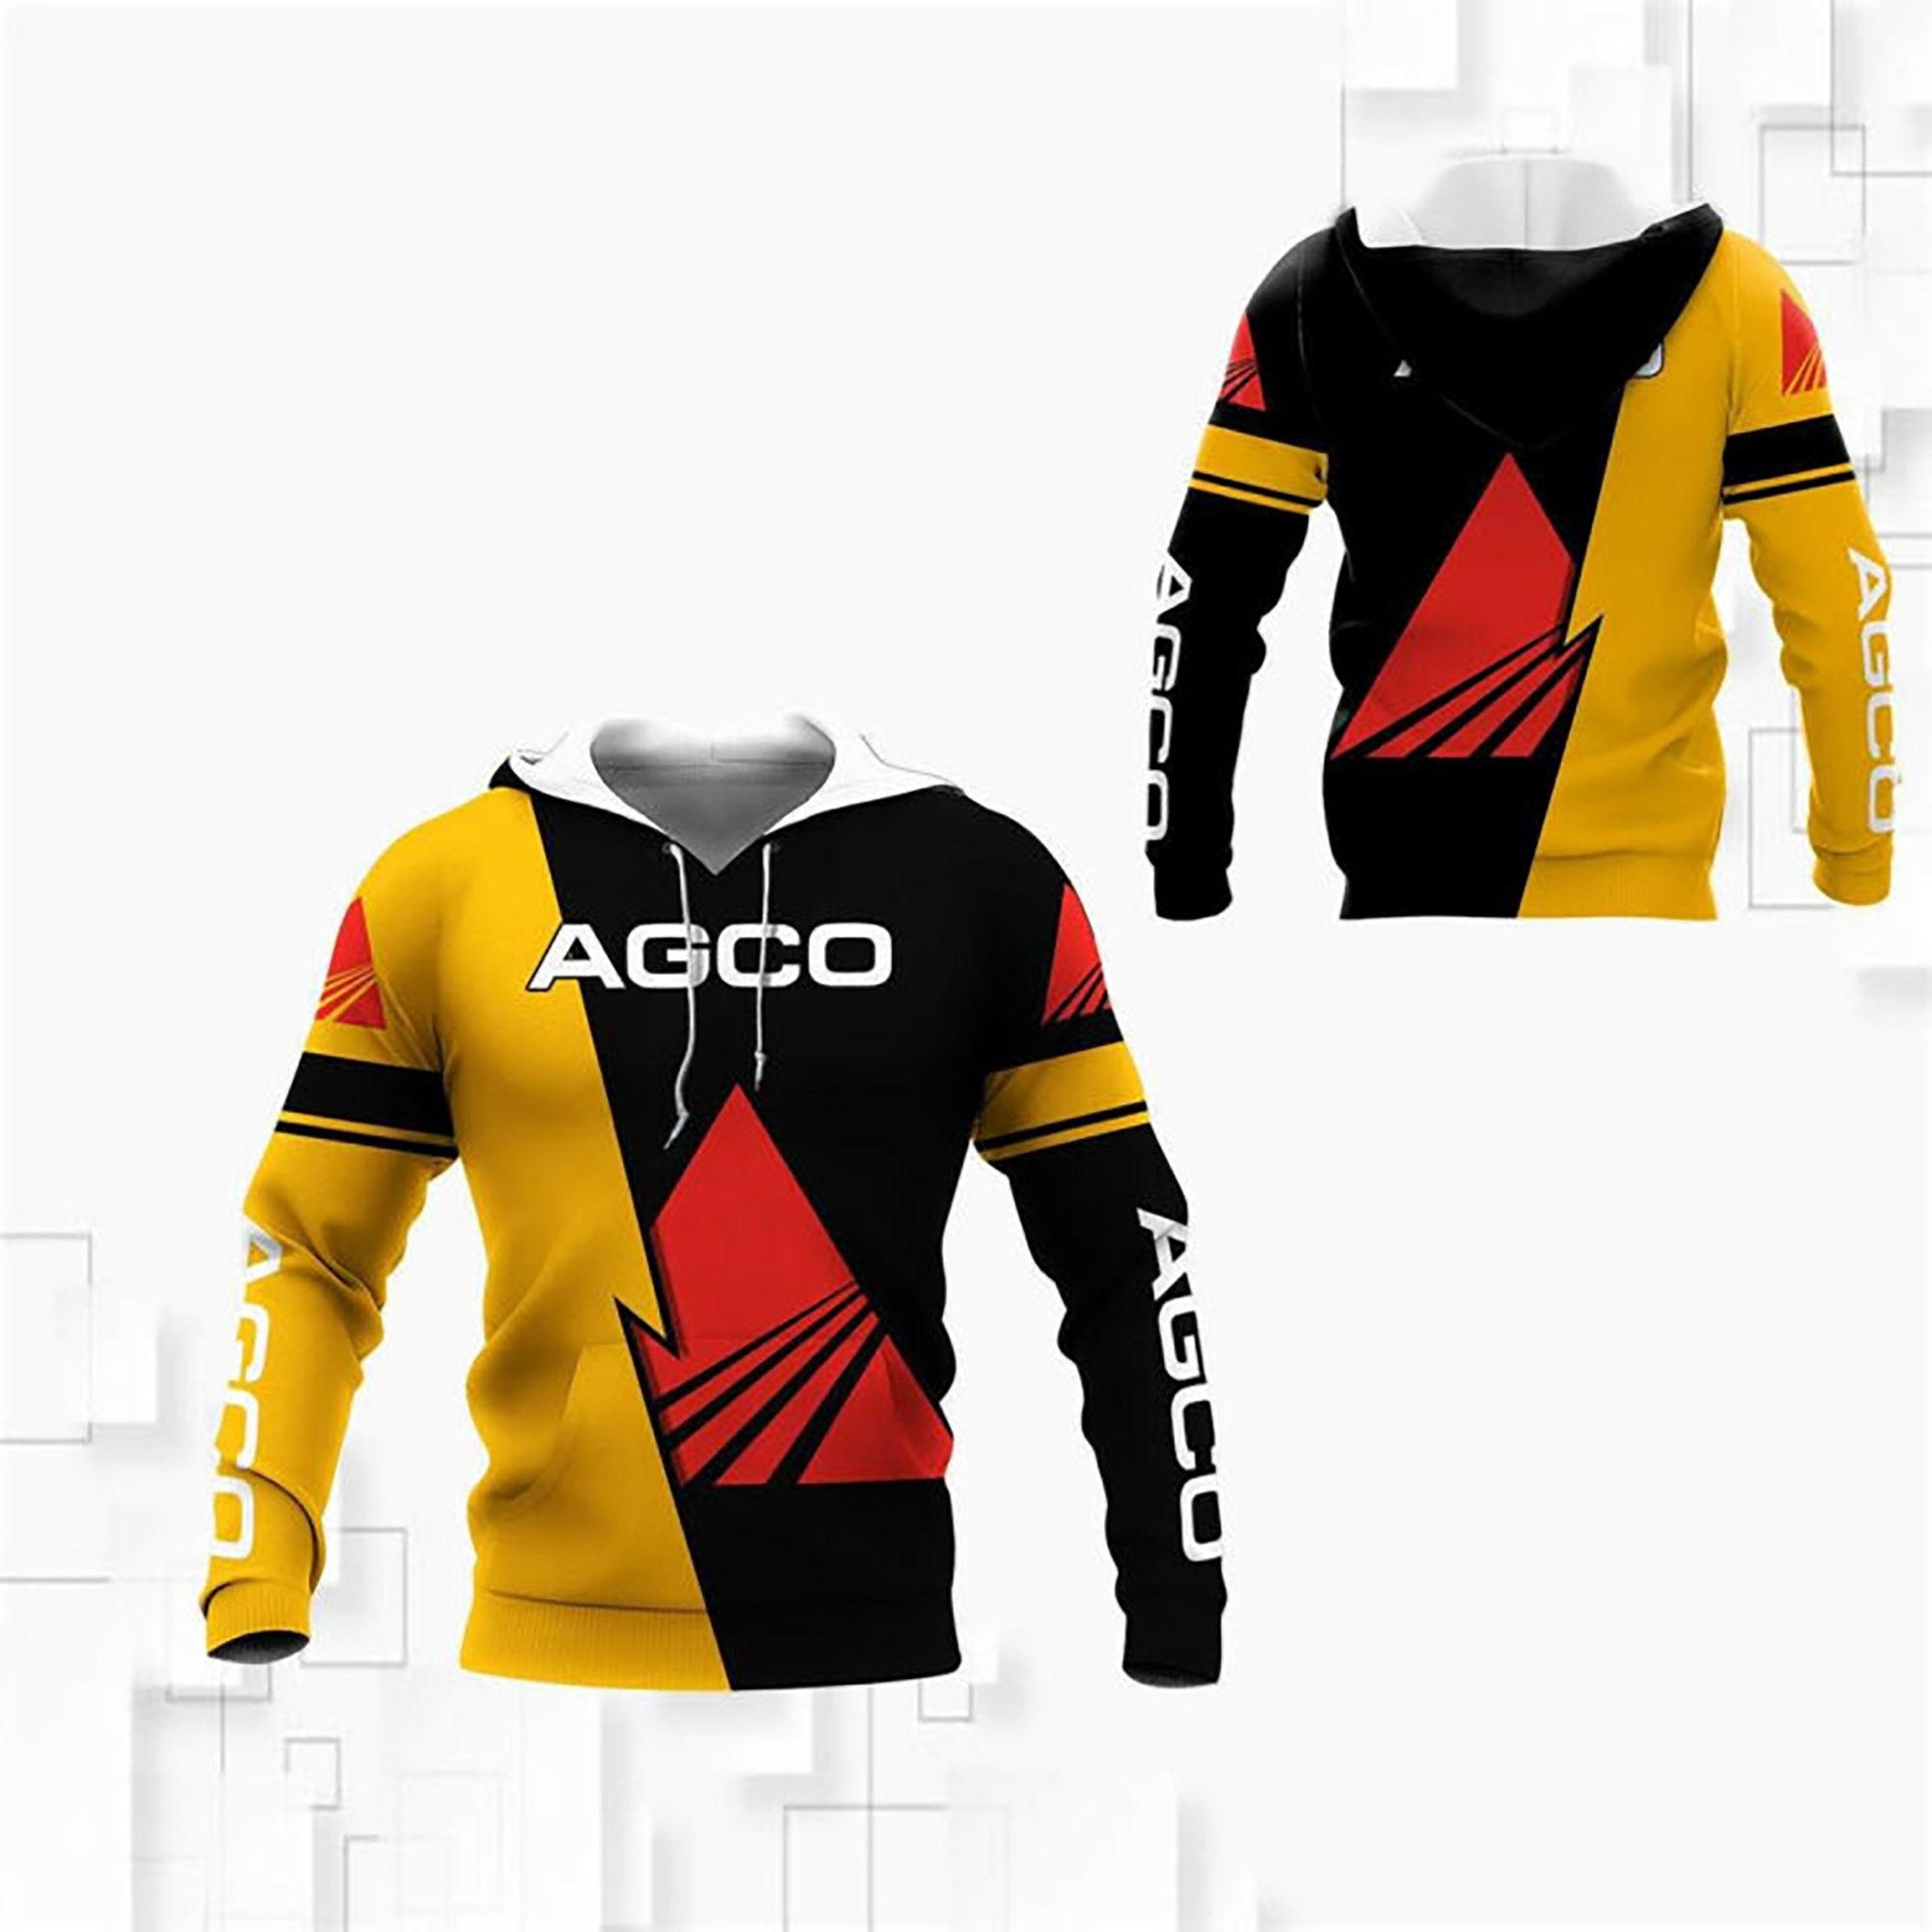 AGCO Shirt Fan Gift, AGCO Tractors Stylist 3D All Over Print Hoodie